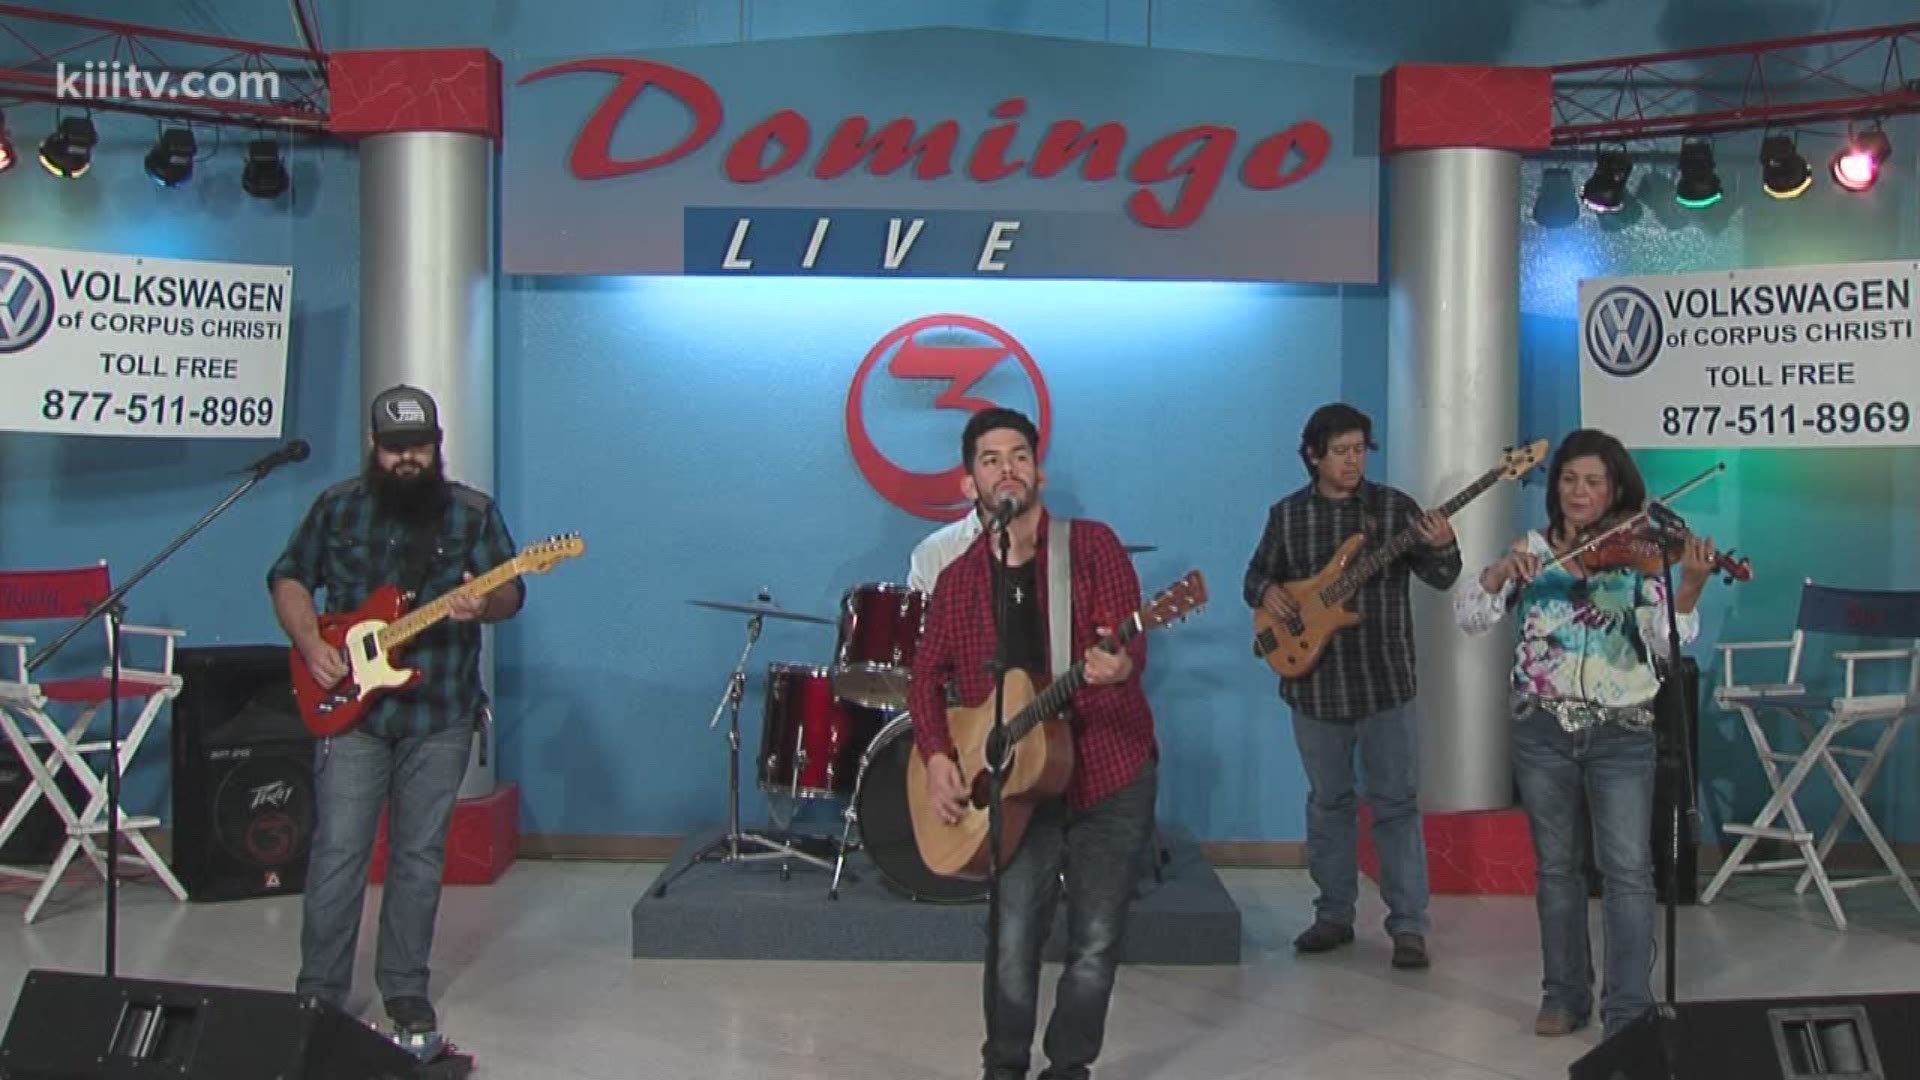 Southern Ashes Performing "Drive" on Domingo Live!